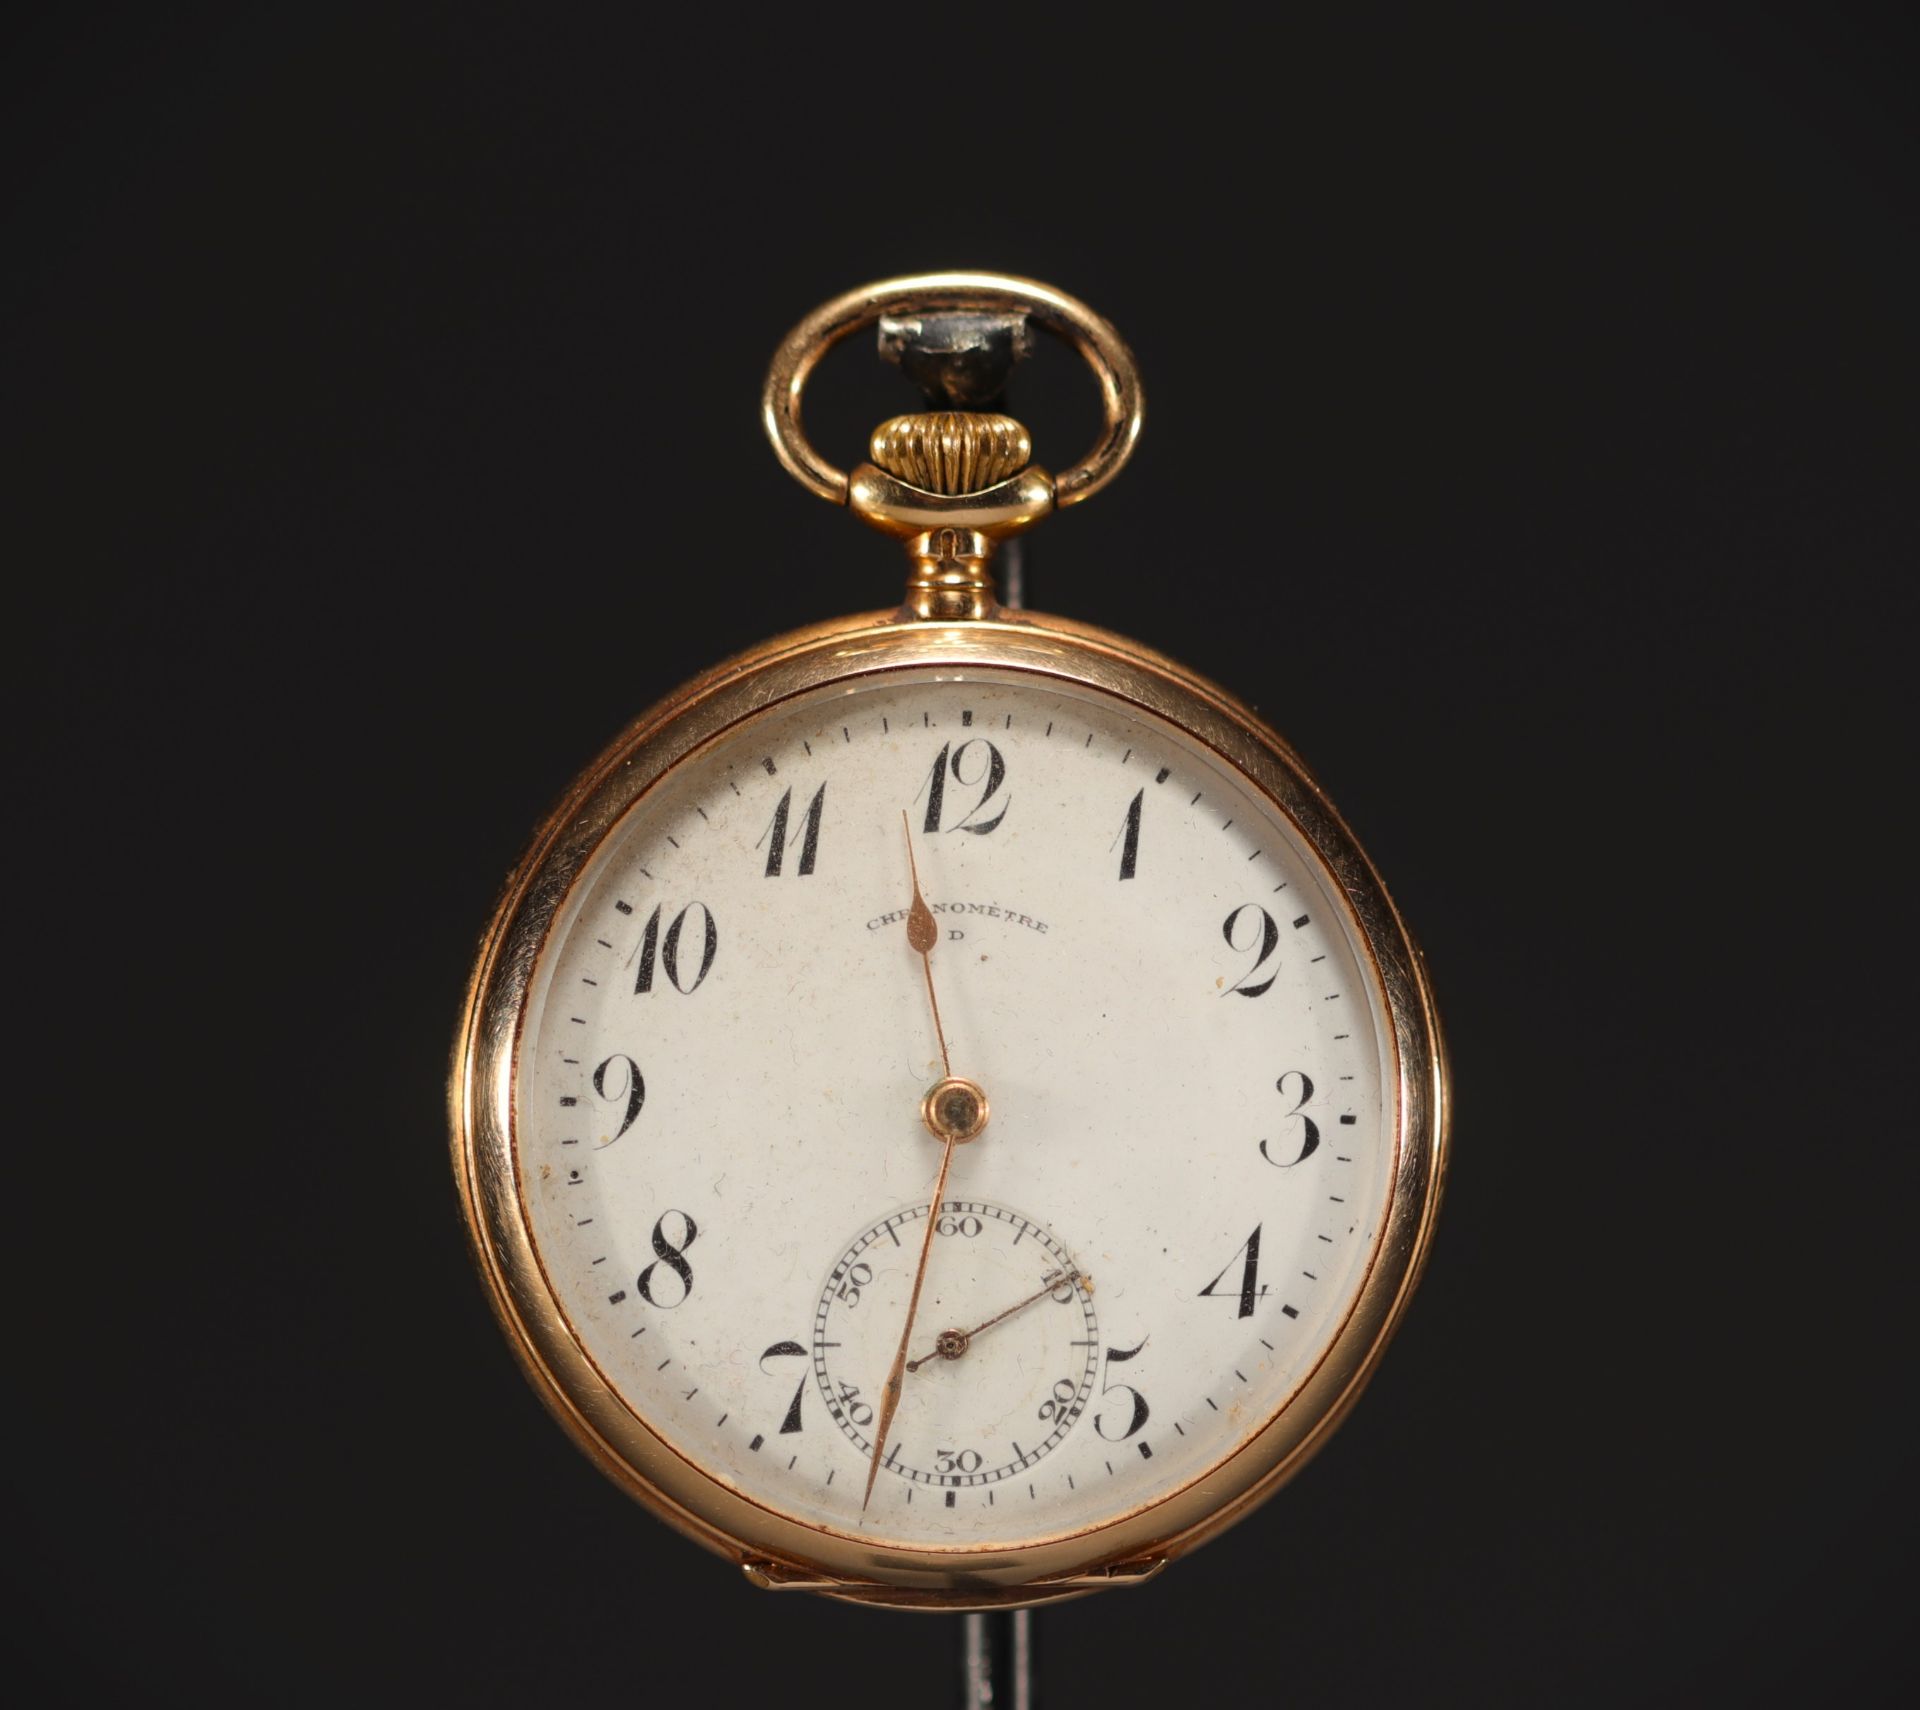 Chronometre D" pocket watch in 18k gold, total weight 70.3 g. - Image 2 of 3